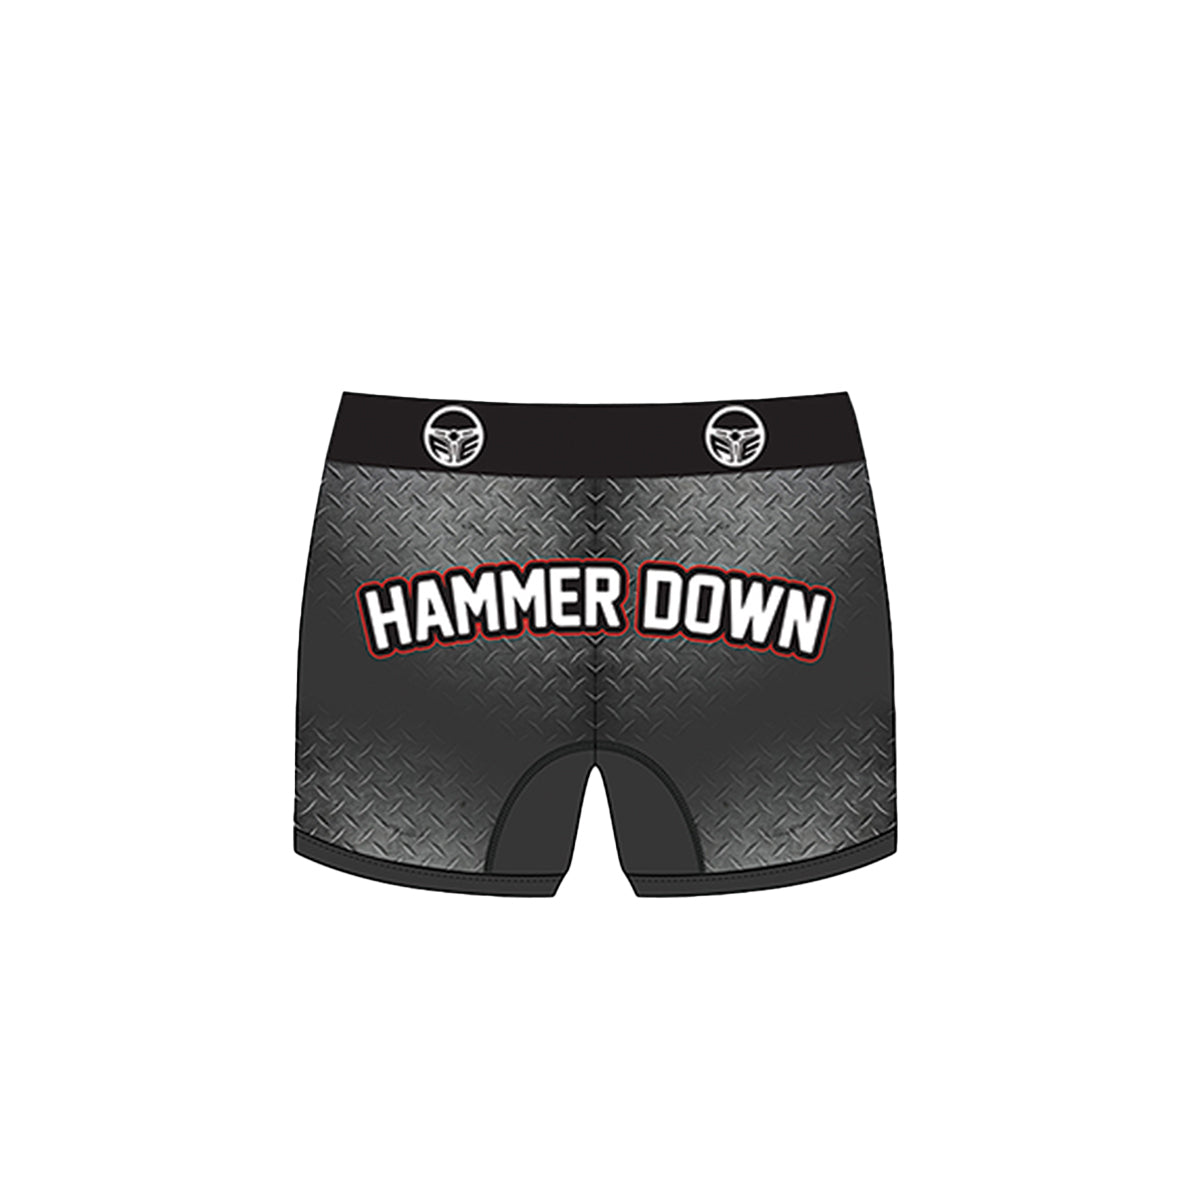 The Right Tool For the Job Boxers - 2 PK